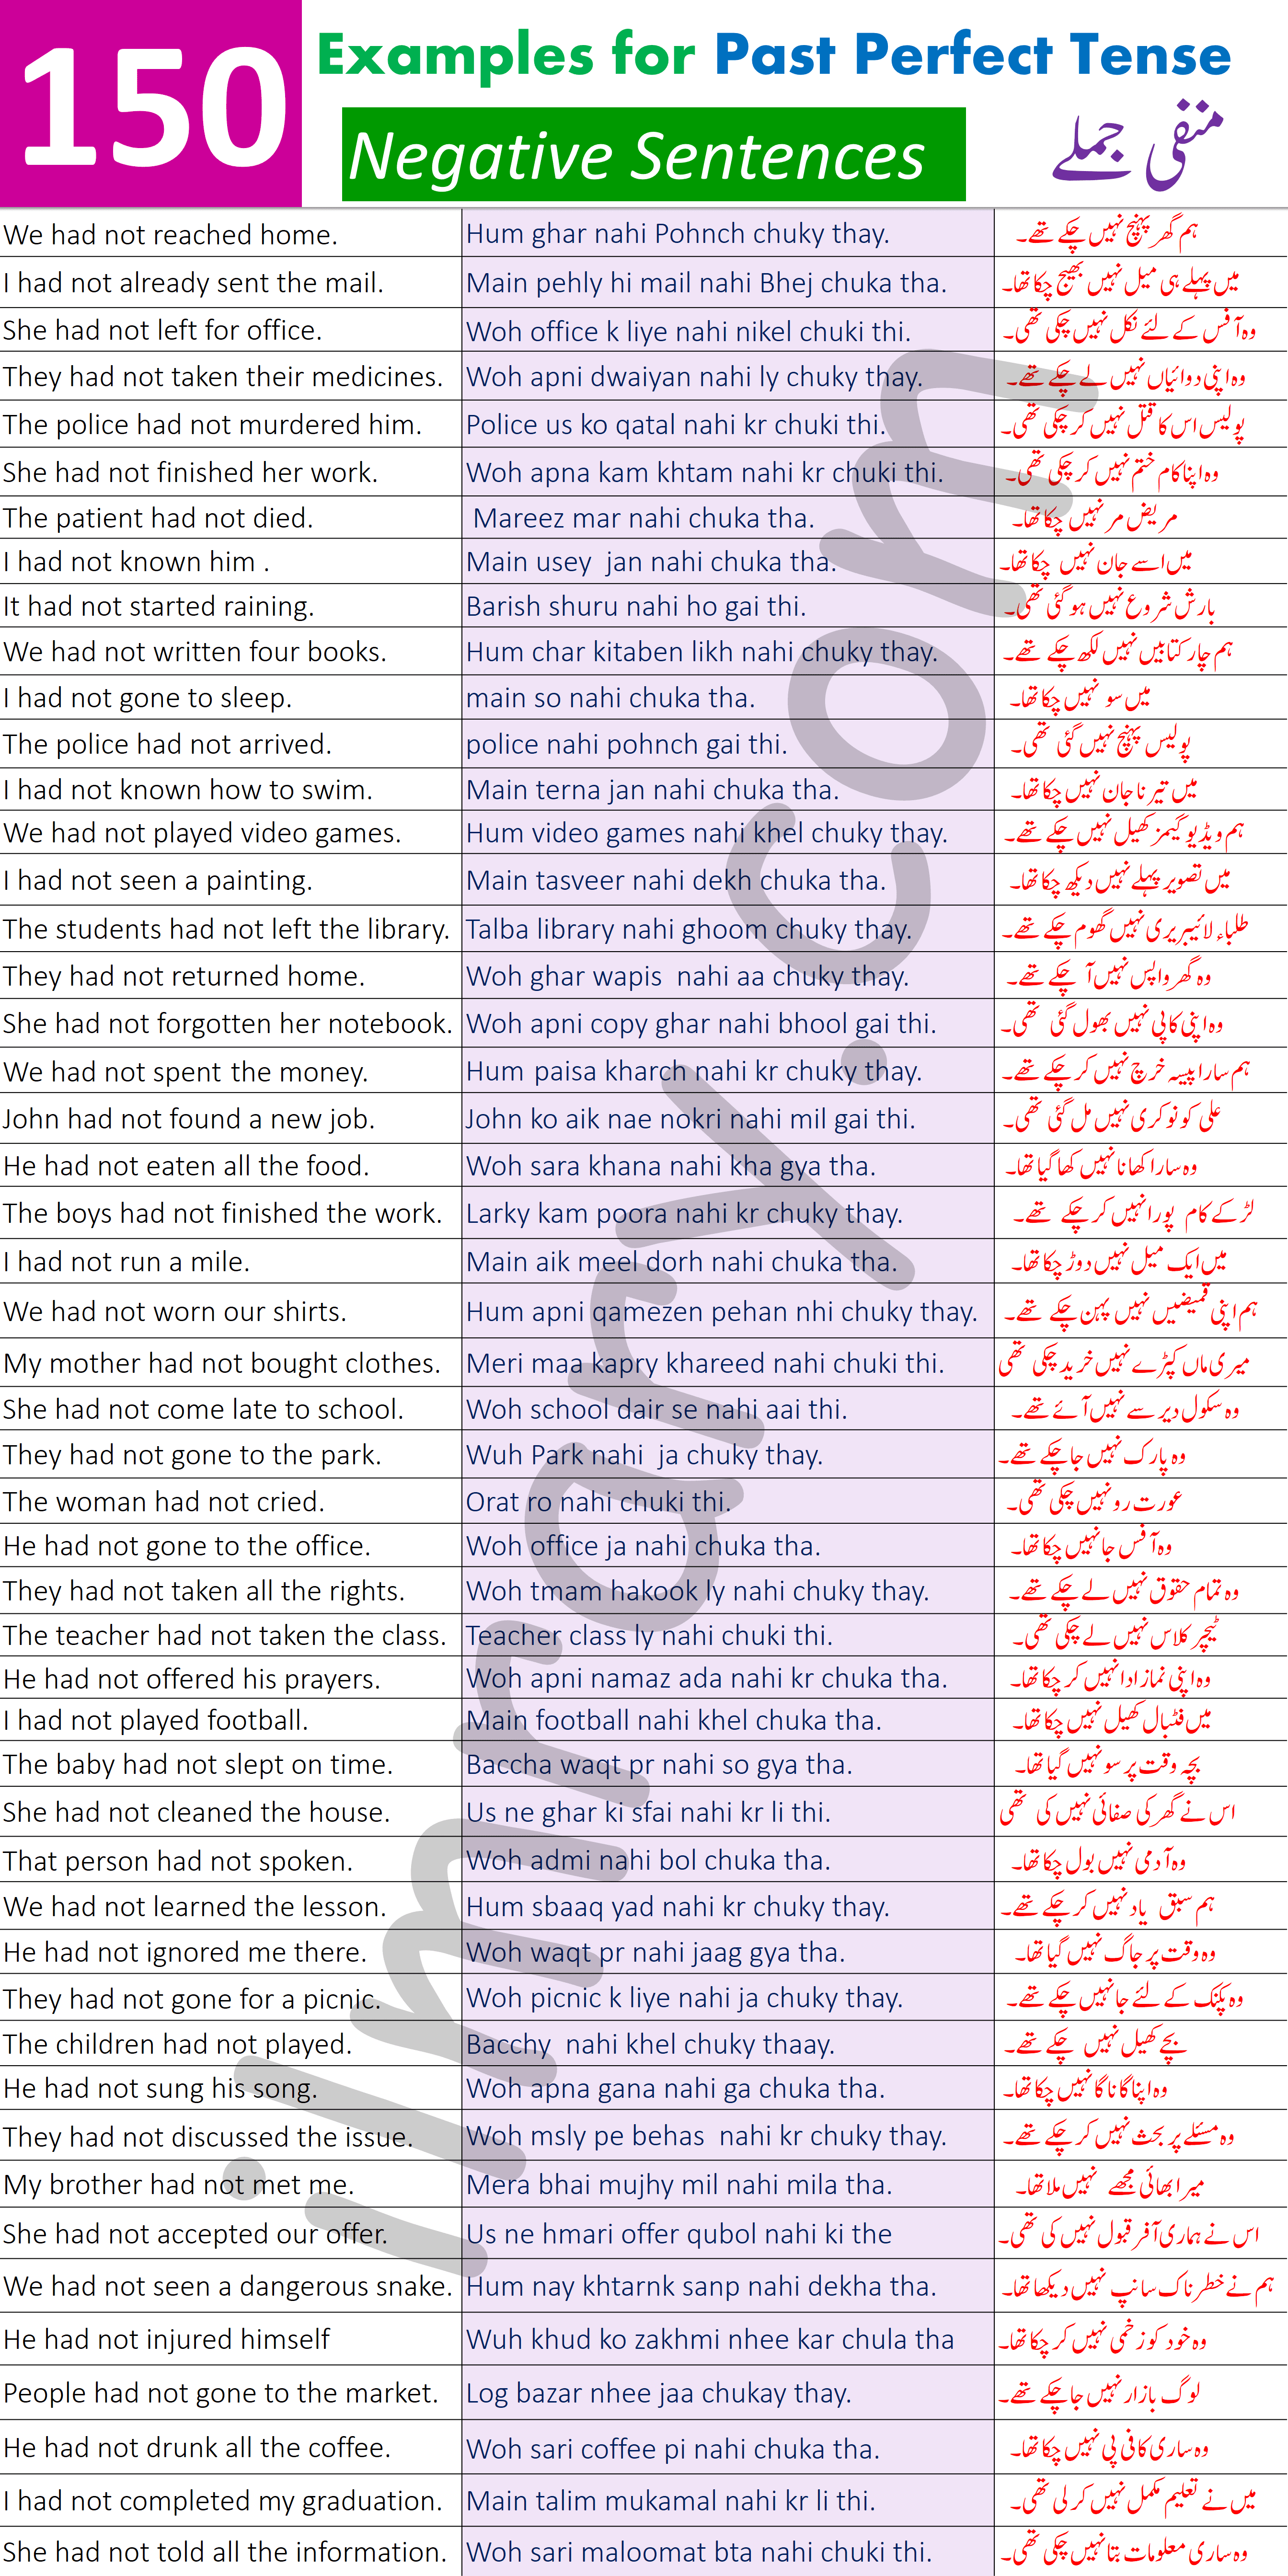 150 Negative Examples for Past Perfect Tense with Urdu Translation